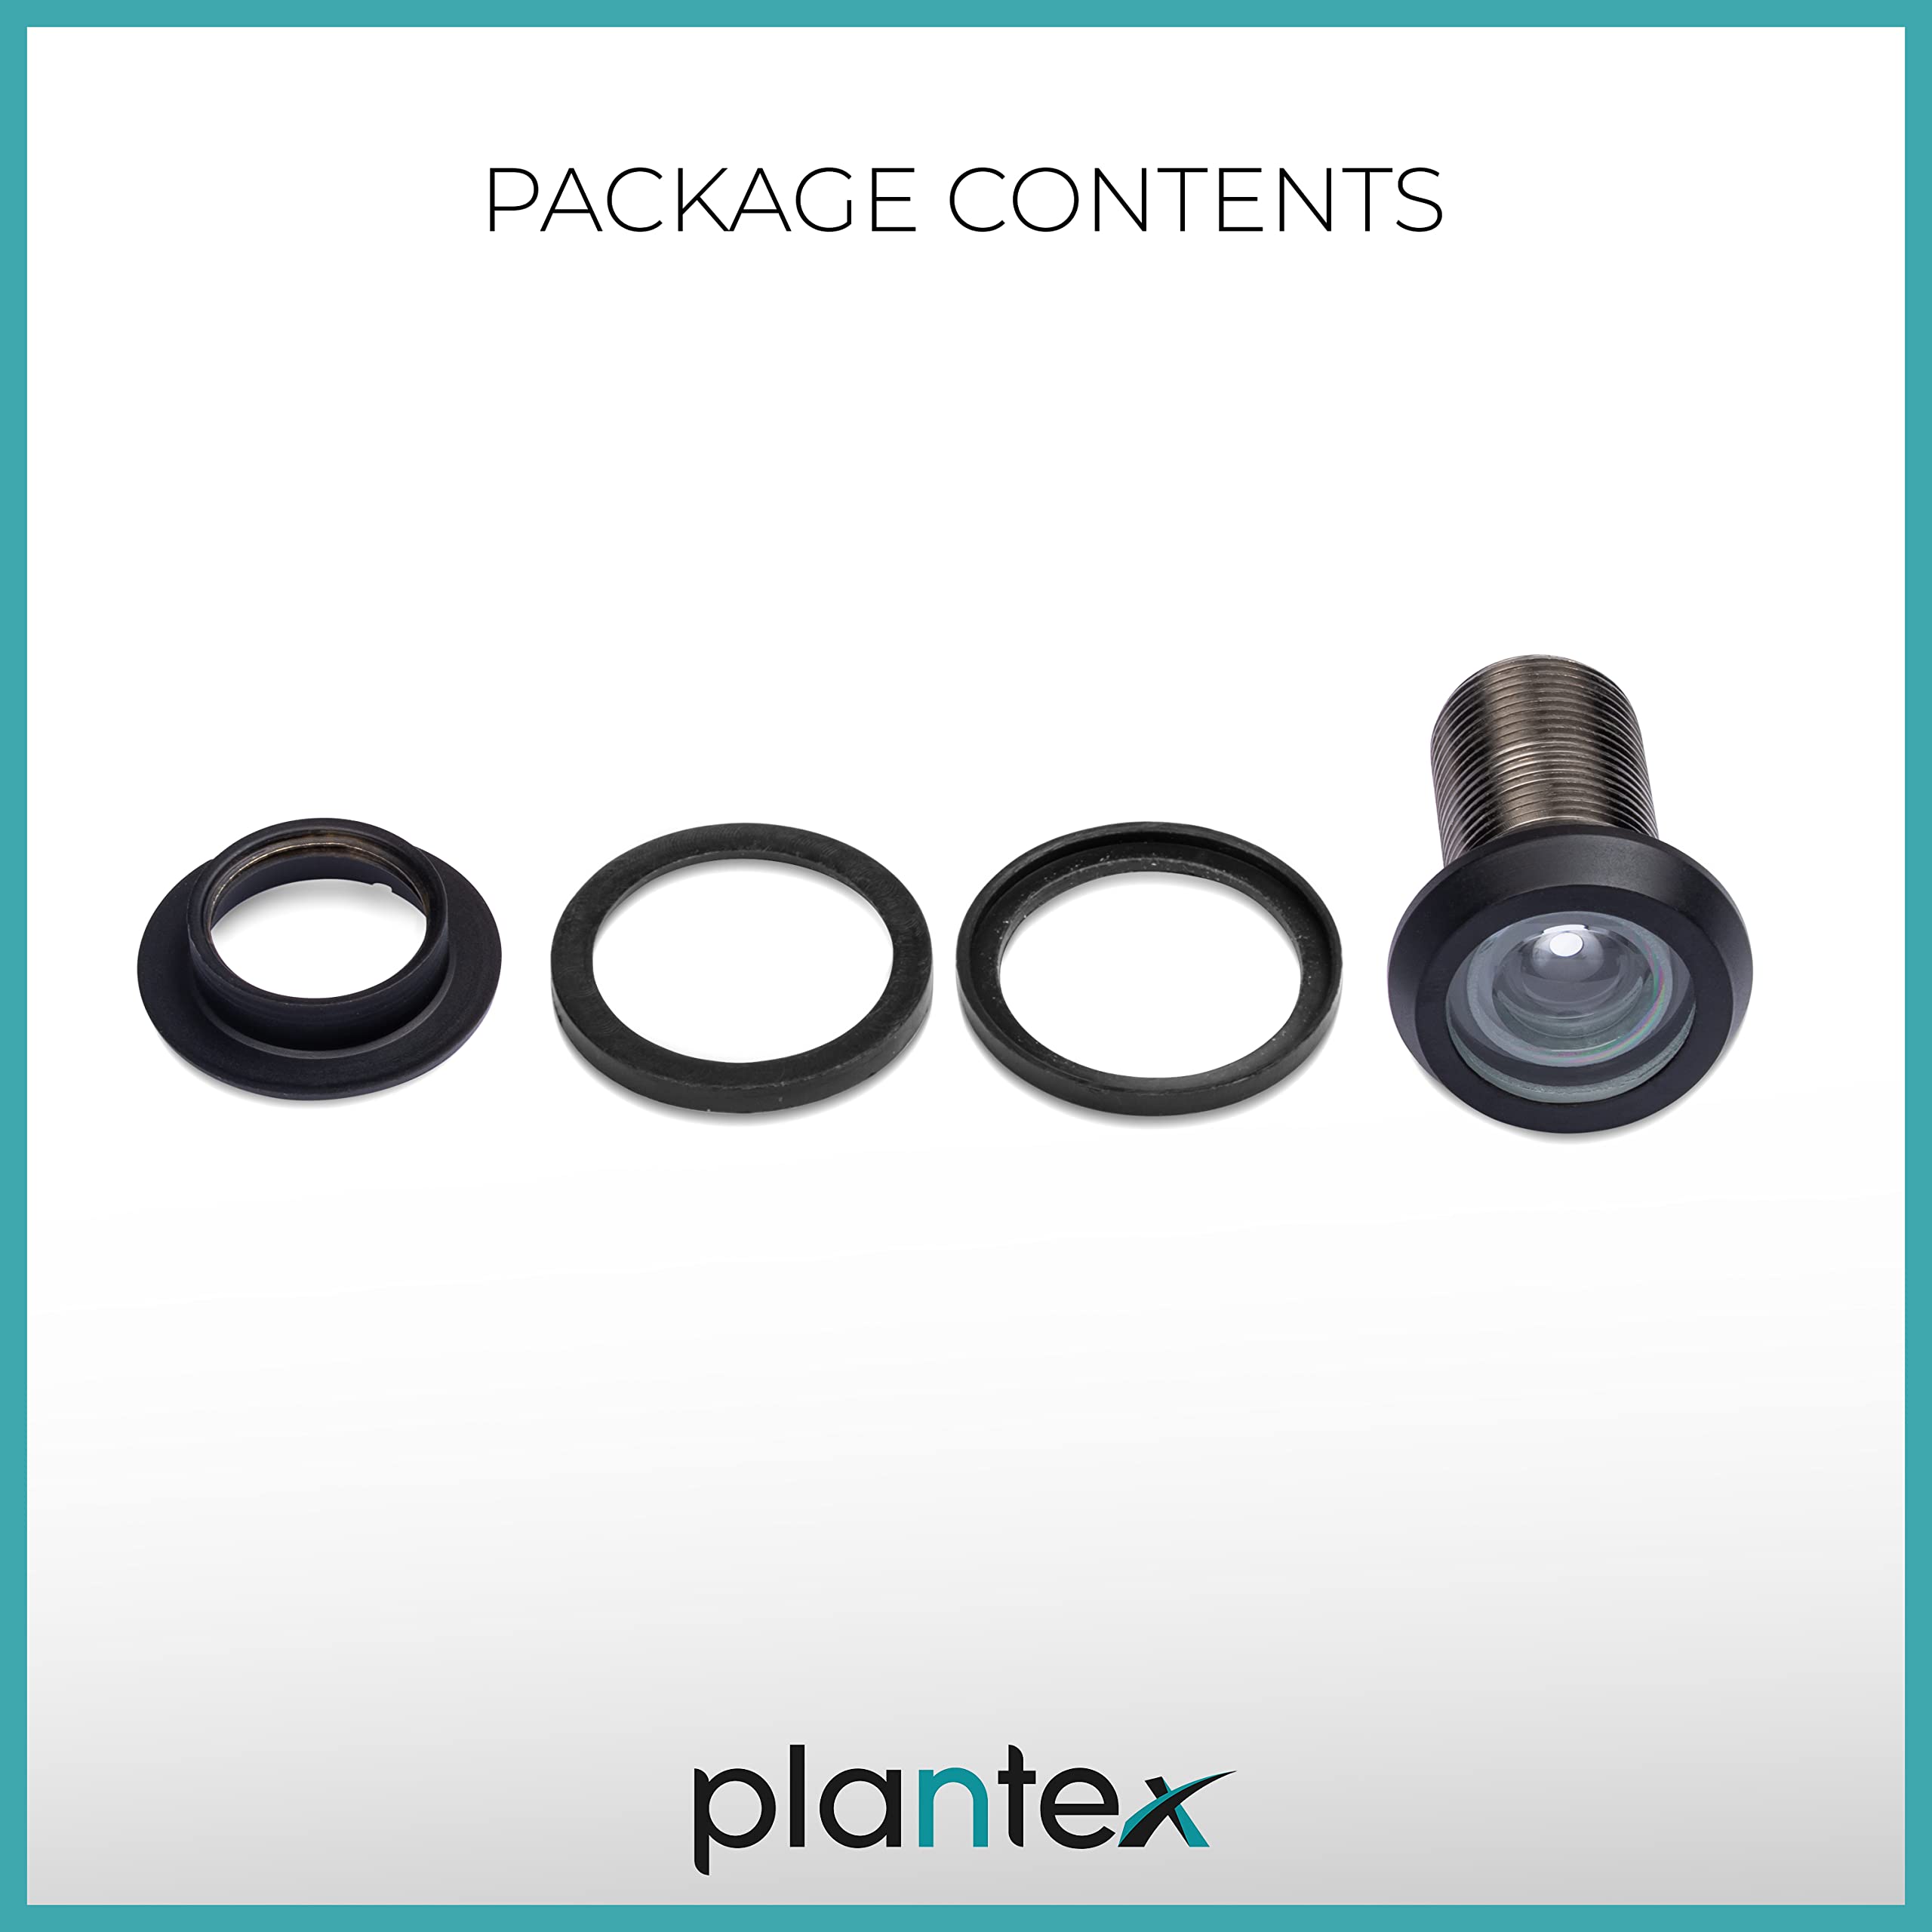 Plantex Black Eye Hole for Main Door - 200 Degree Wide Magic Eye viewer for Safety - Pack of 40